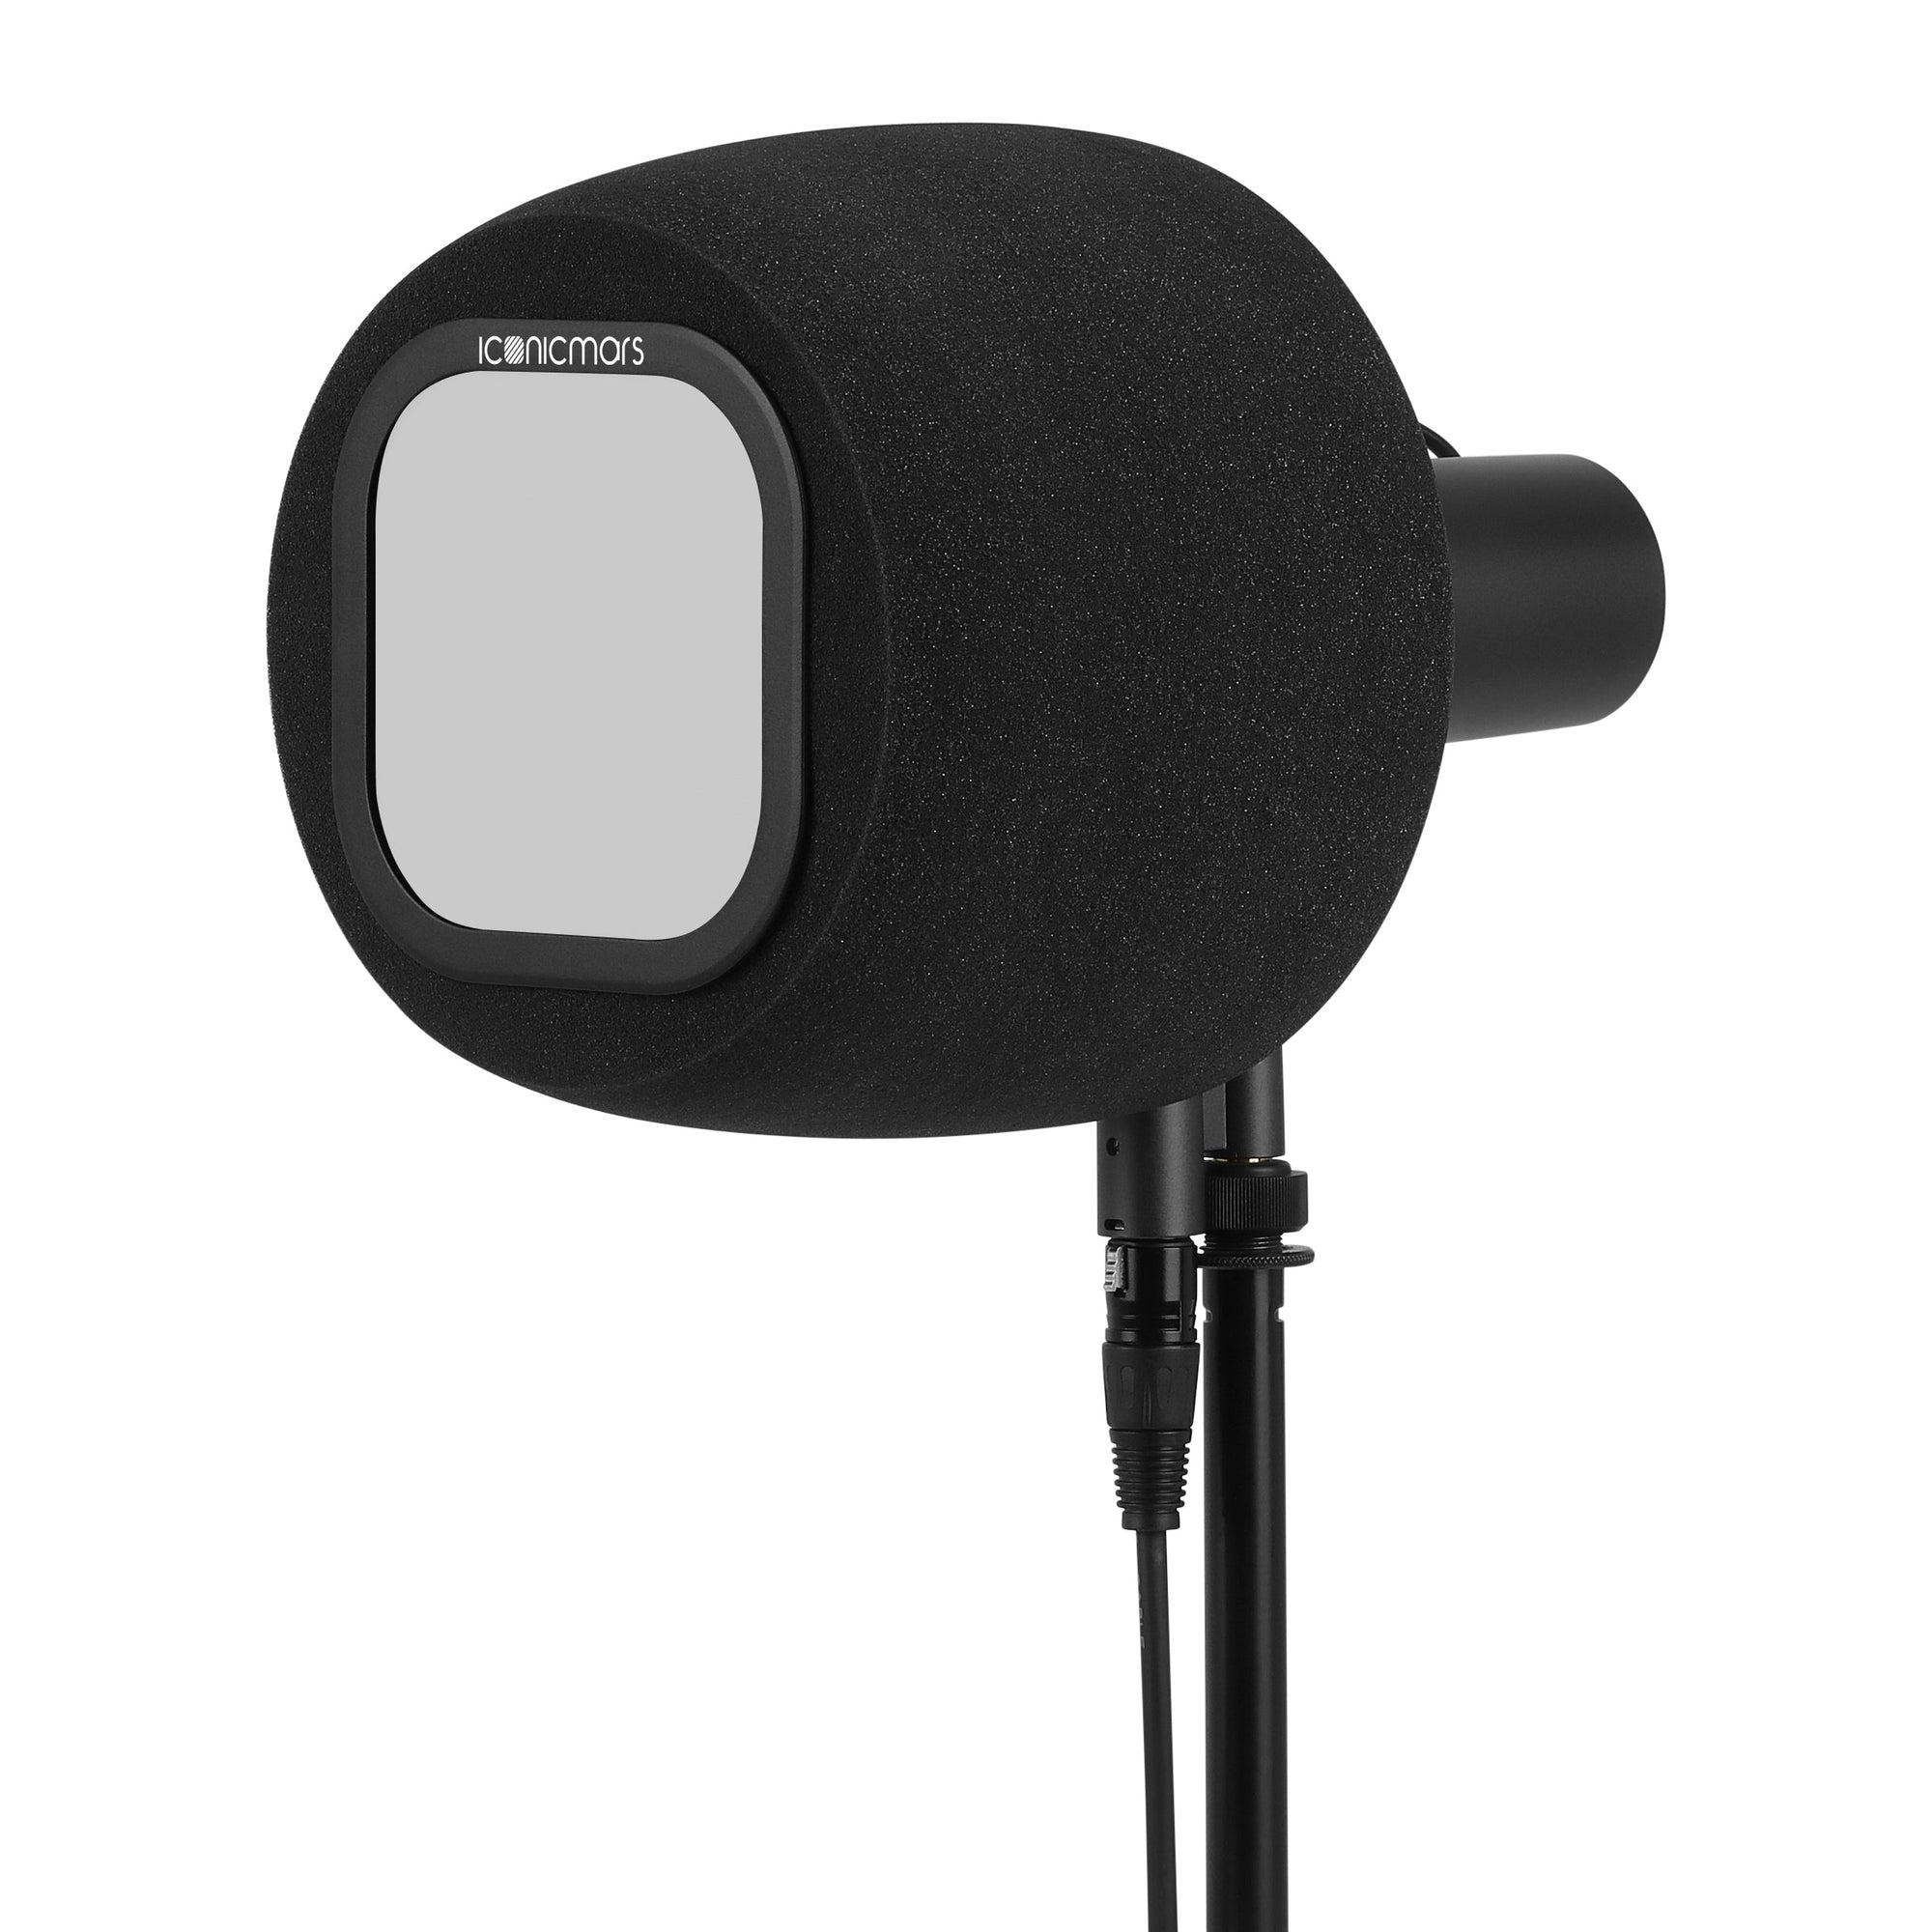 Comet X7B side with pop filter stand with eyeball like design for front facing microphone like Shure SM7B  -- Soft White